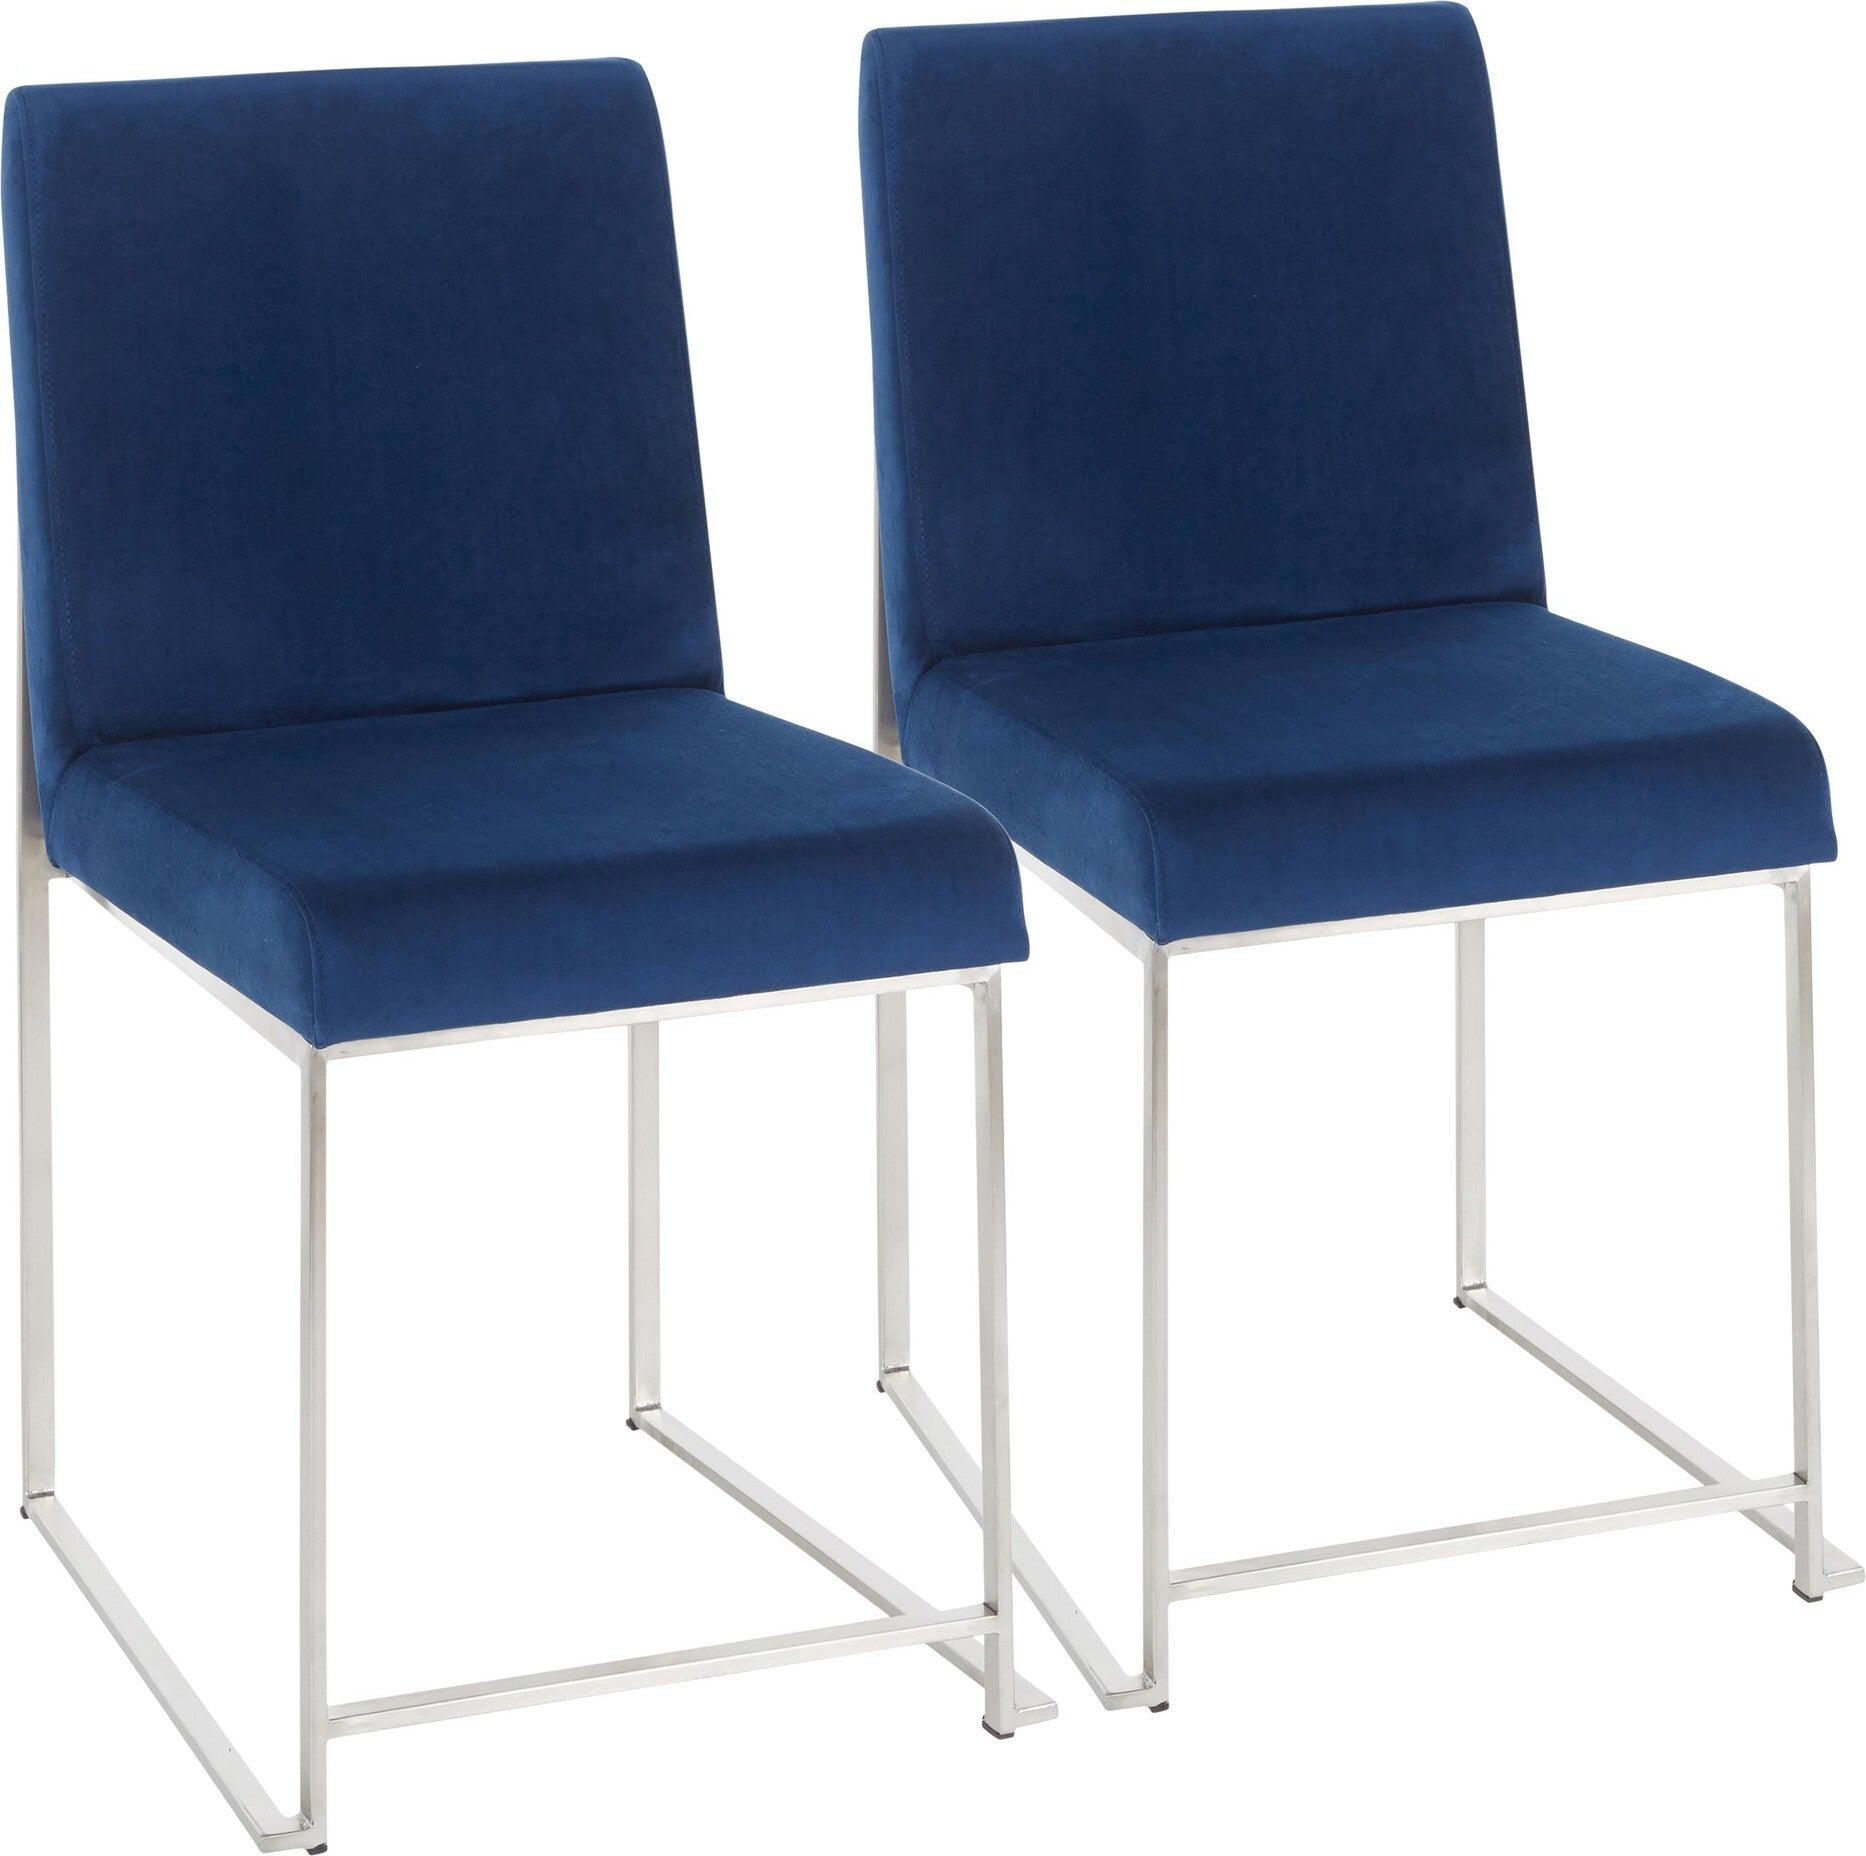 Lumisource Dining Chairs - High Back Fuji Contemporary Dining Chair in Stainless Steel and Blue Velvet (Set of 2)